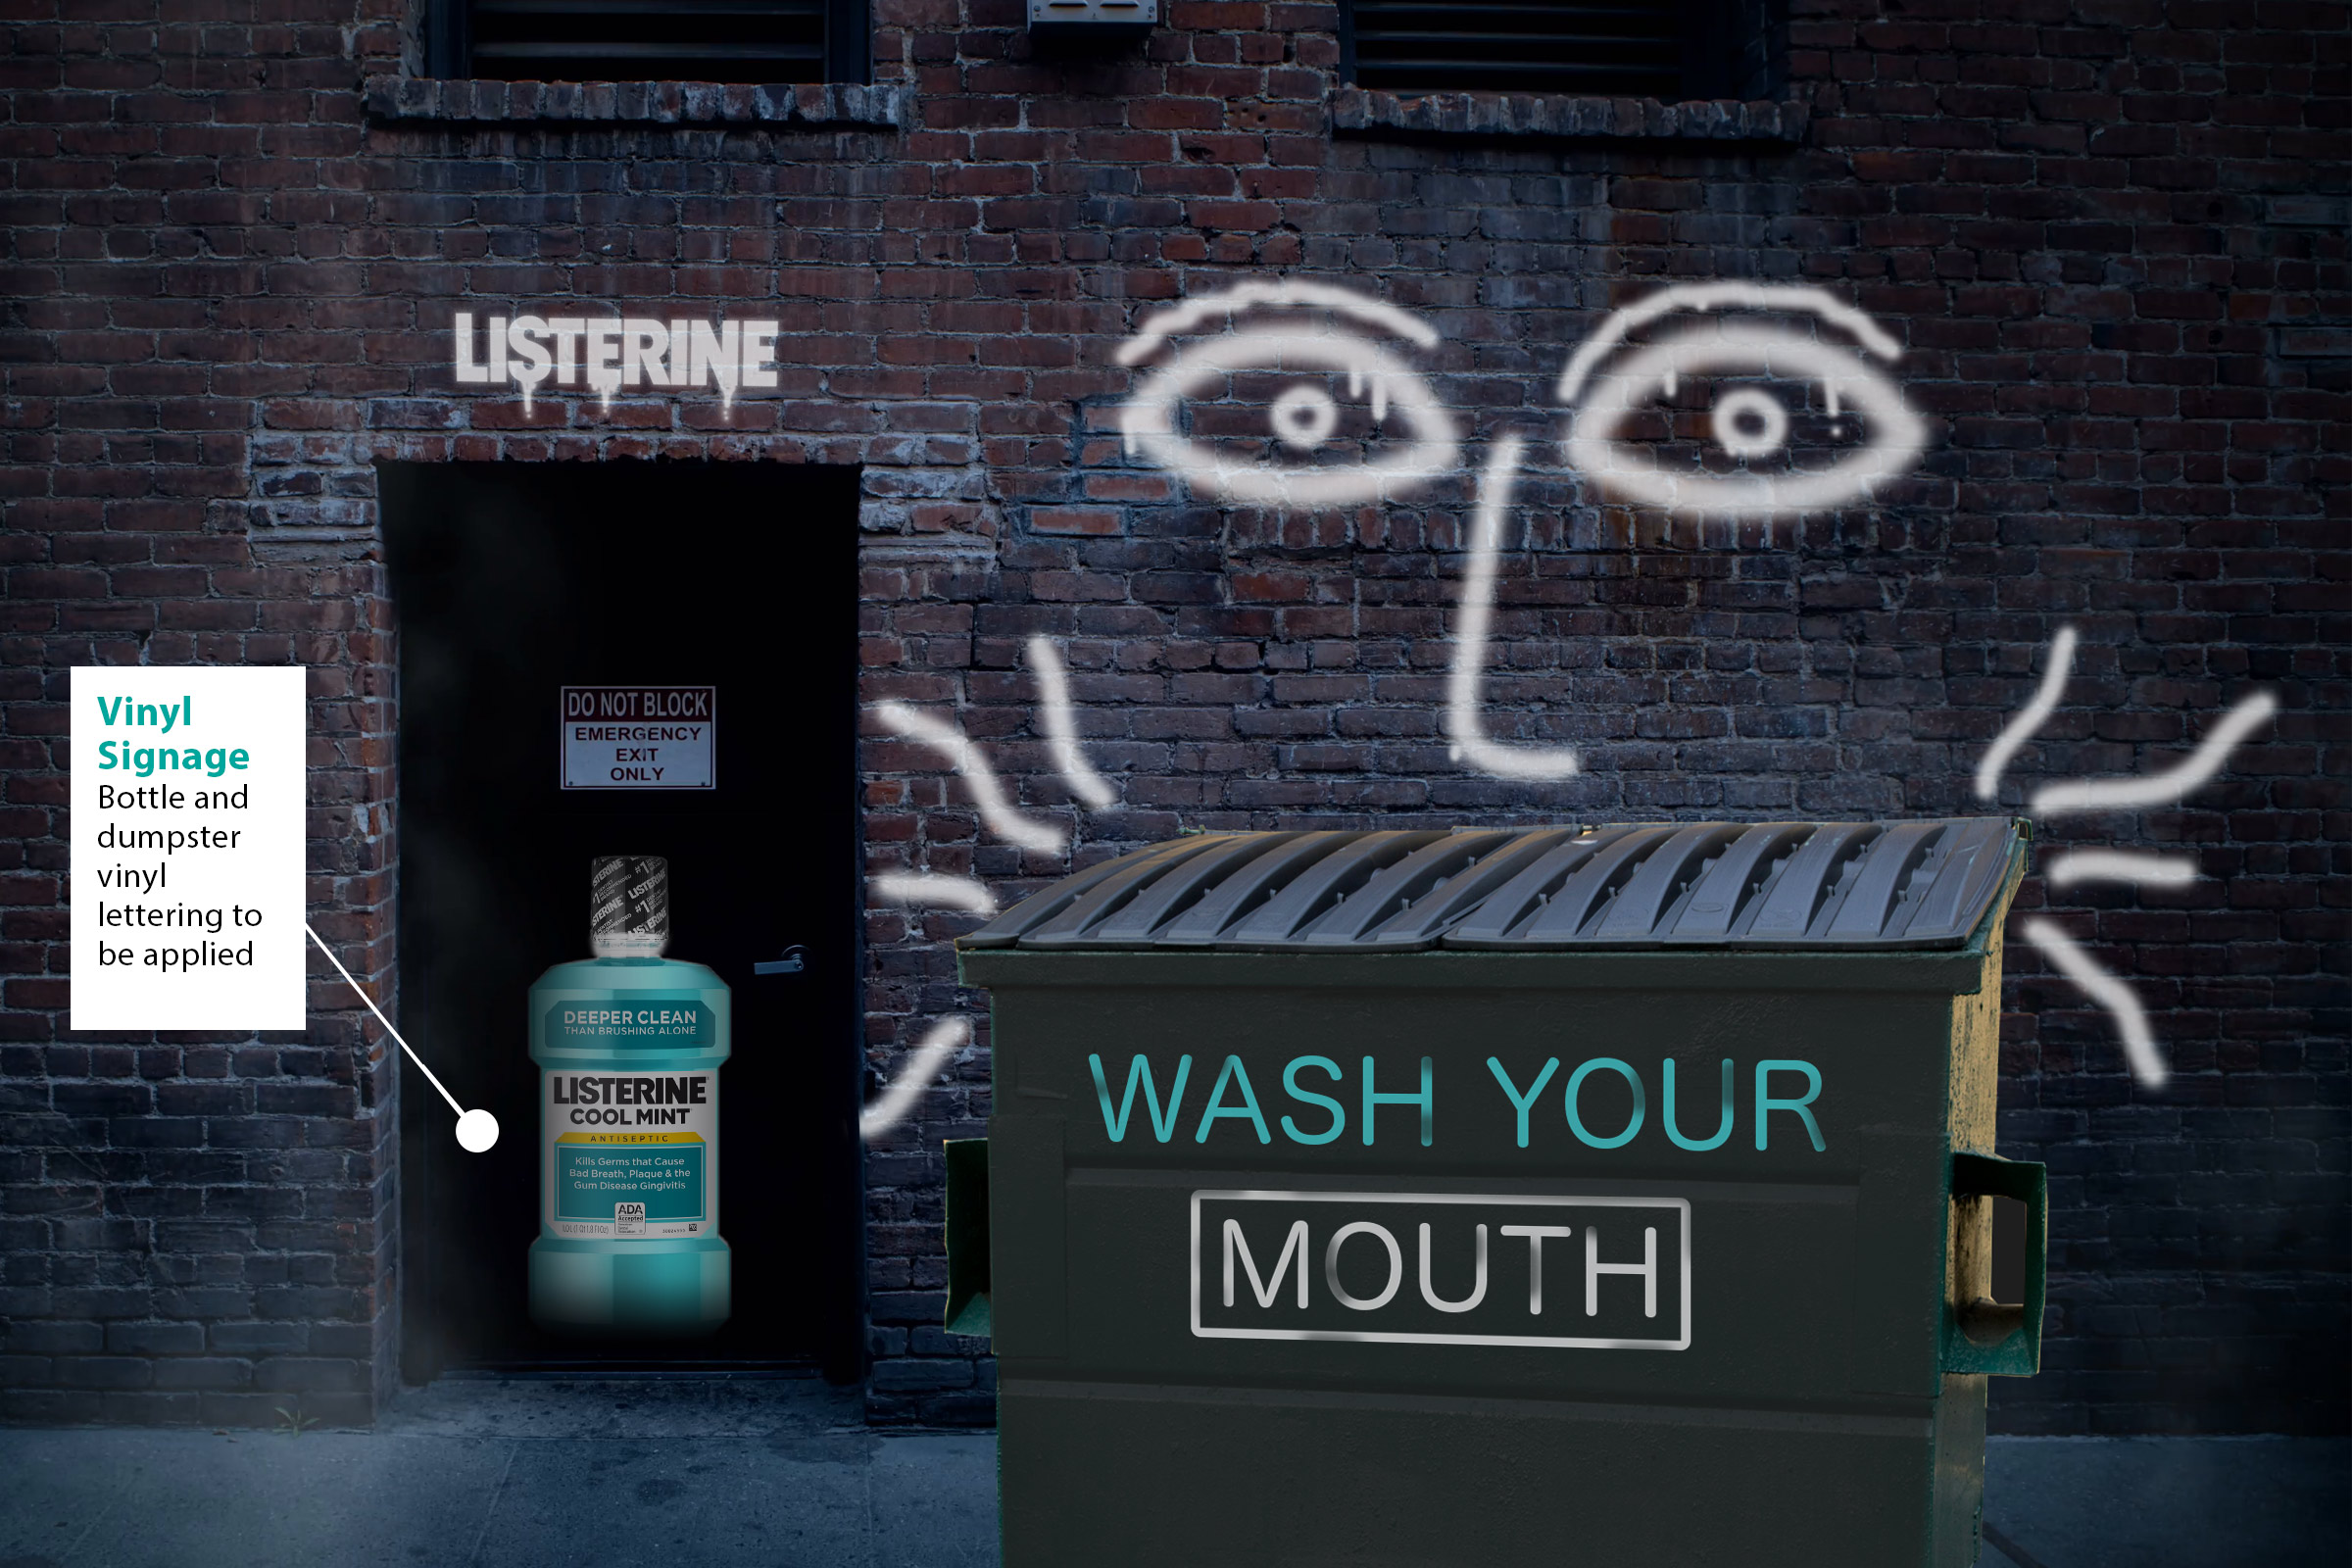 Listerine-Wash_Your_Mouth_Outdoor_signage.jpg